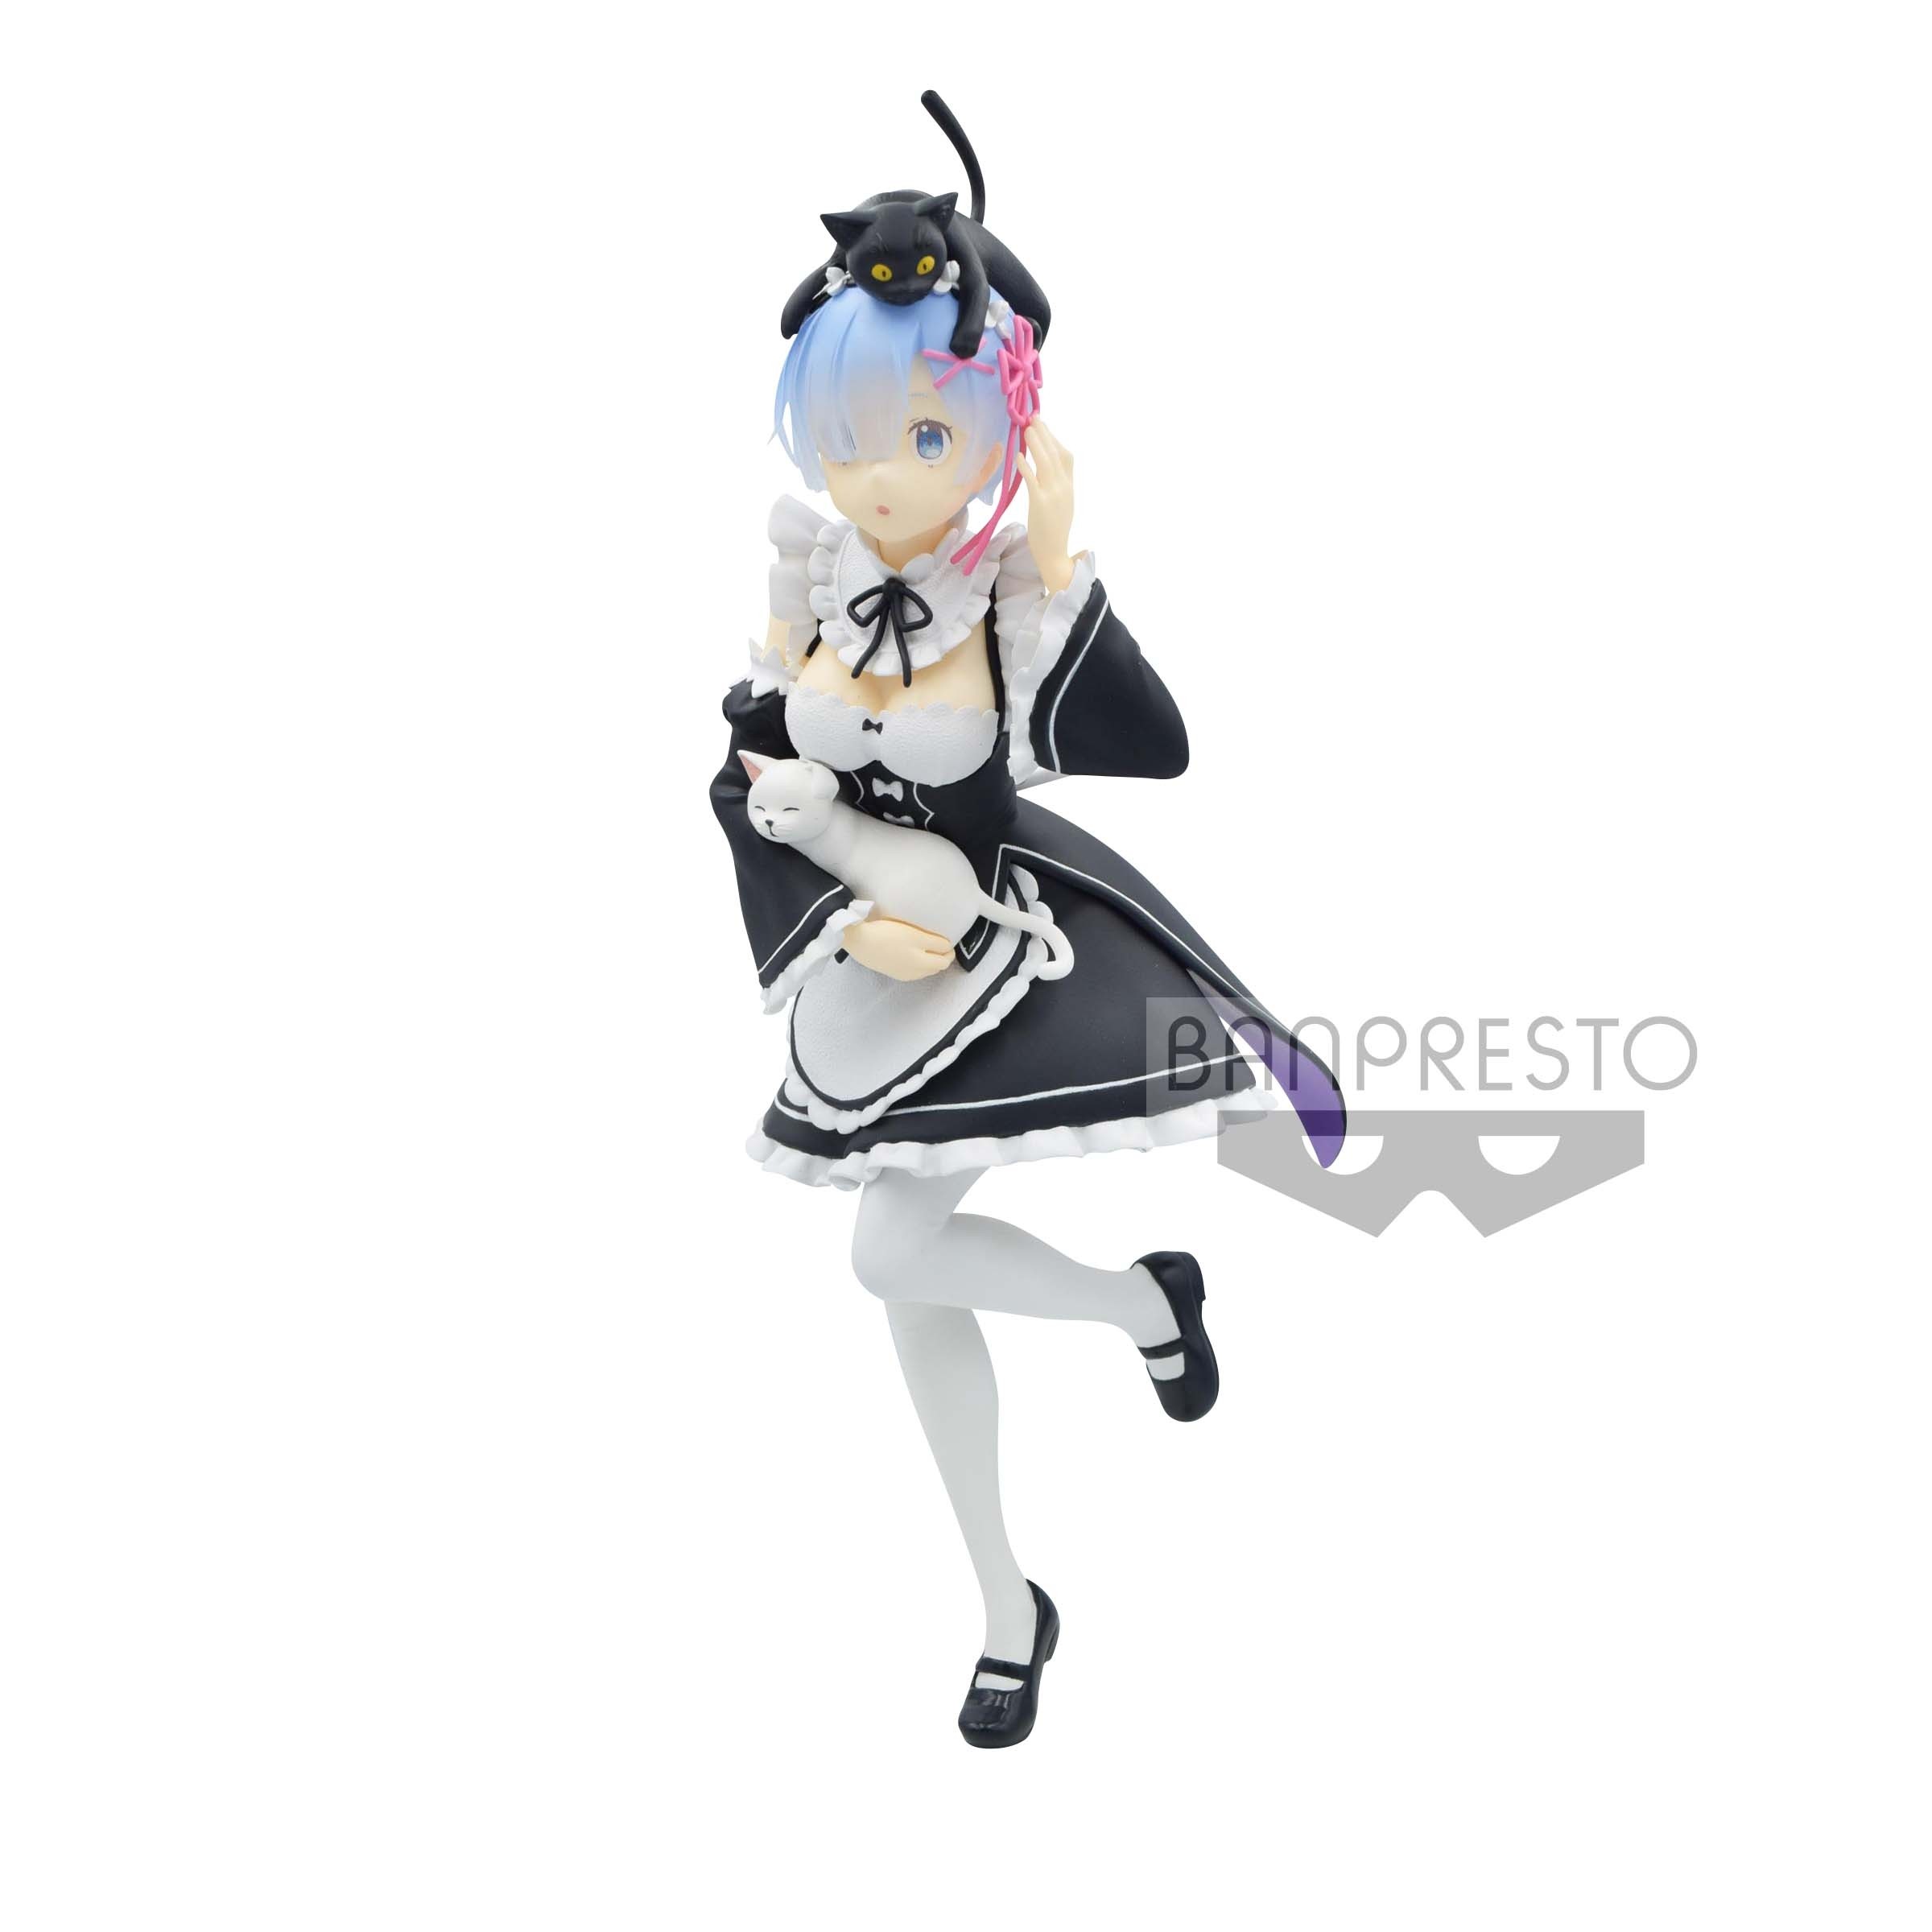 Re:Zero Starting Life in Another World Figure ESPRESTO Choosing a Texture Suitable Rem